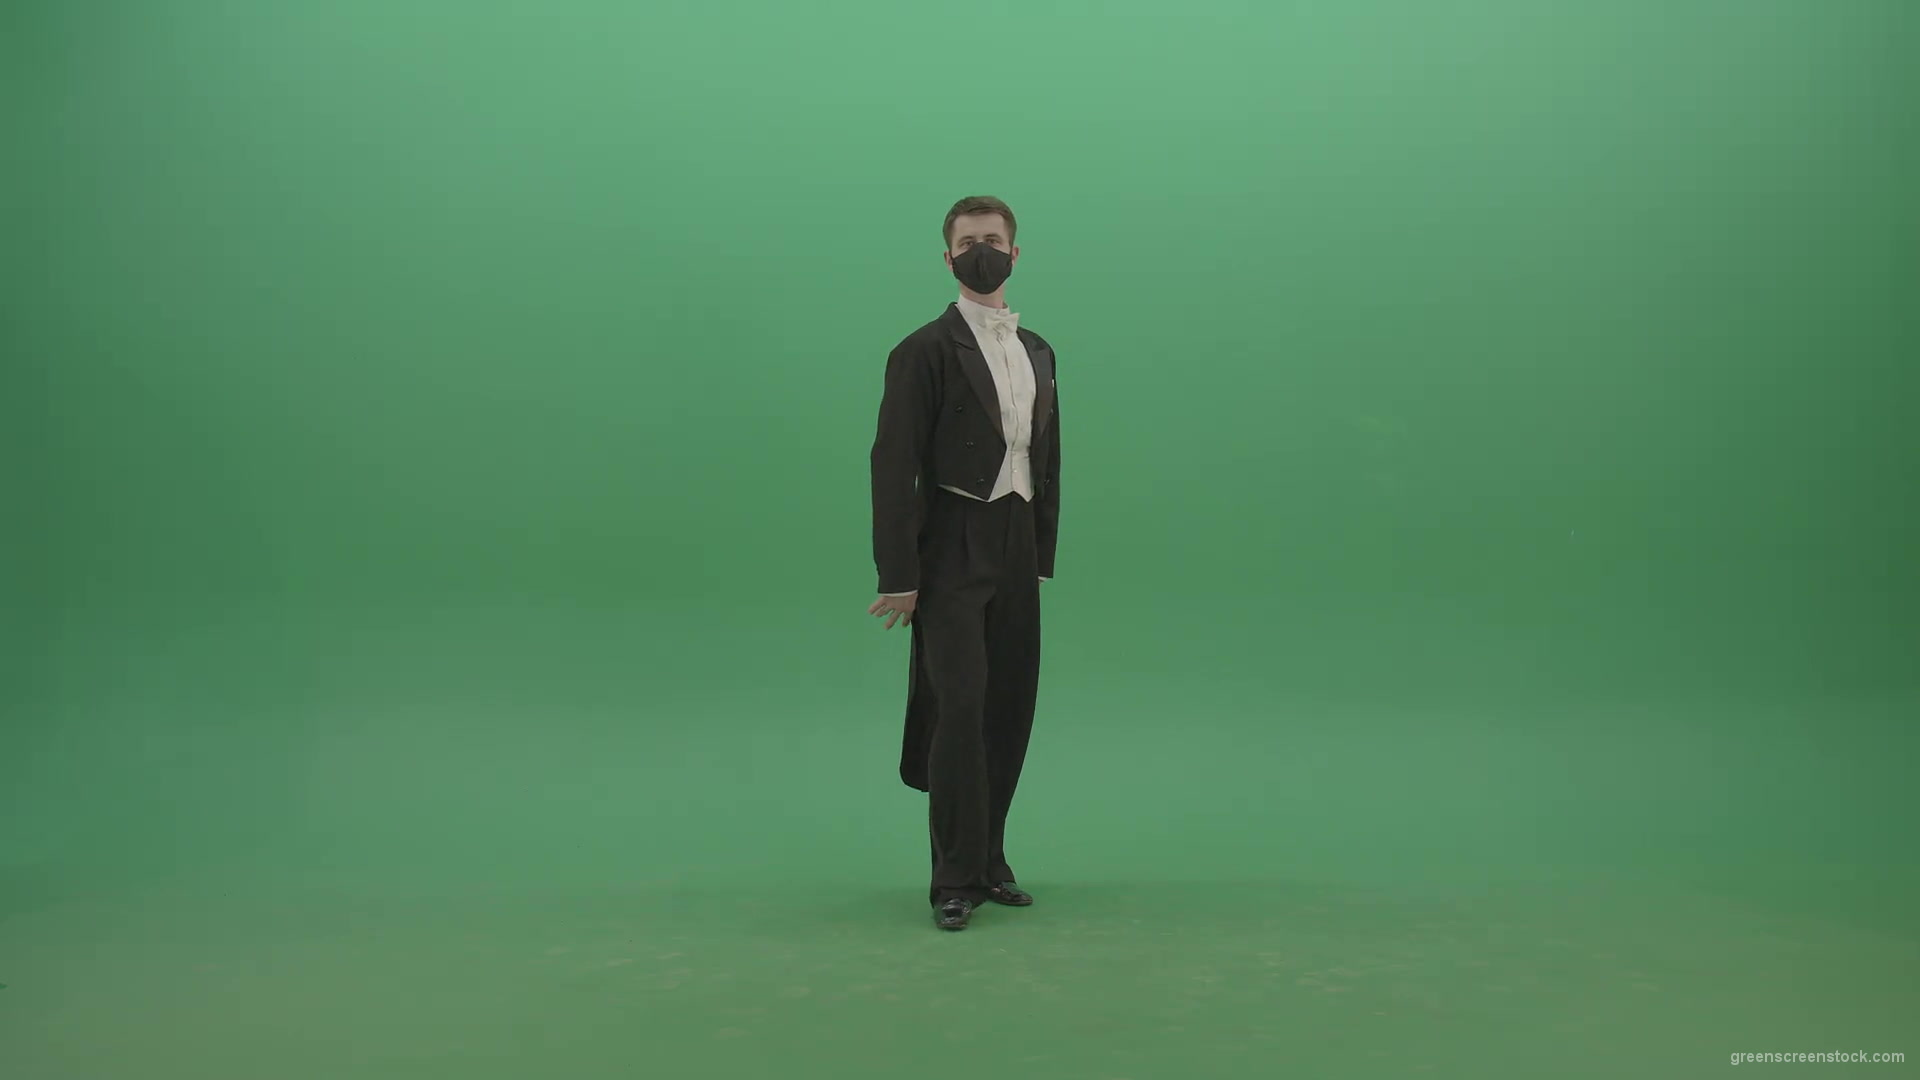 Man-in-Classical-ballroom-suite-making-wish-regards-to-impres-audience-in-black-medicine-mask-on-green-screen-4K-Video-Footage-1920_002 Green Screen Stock